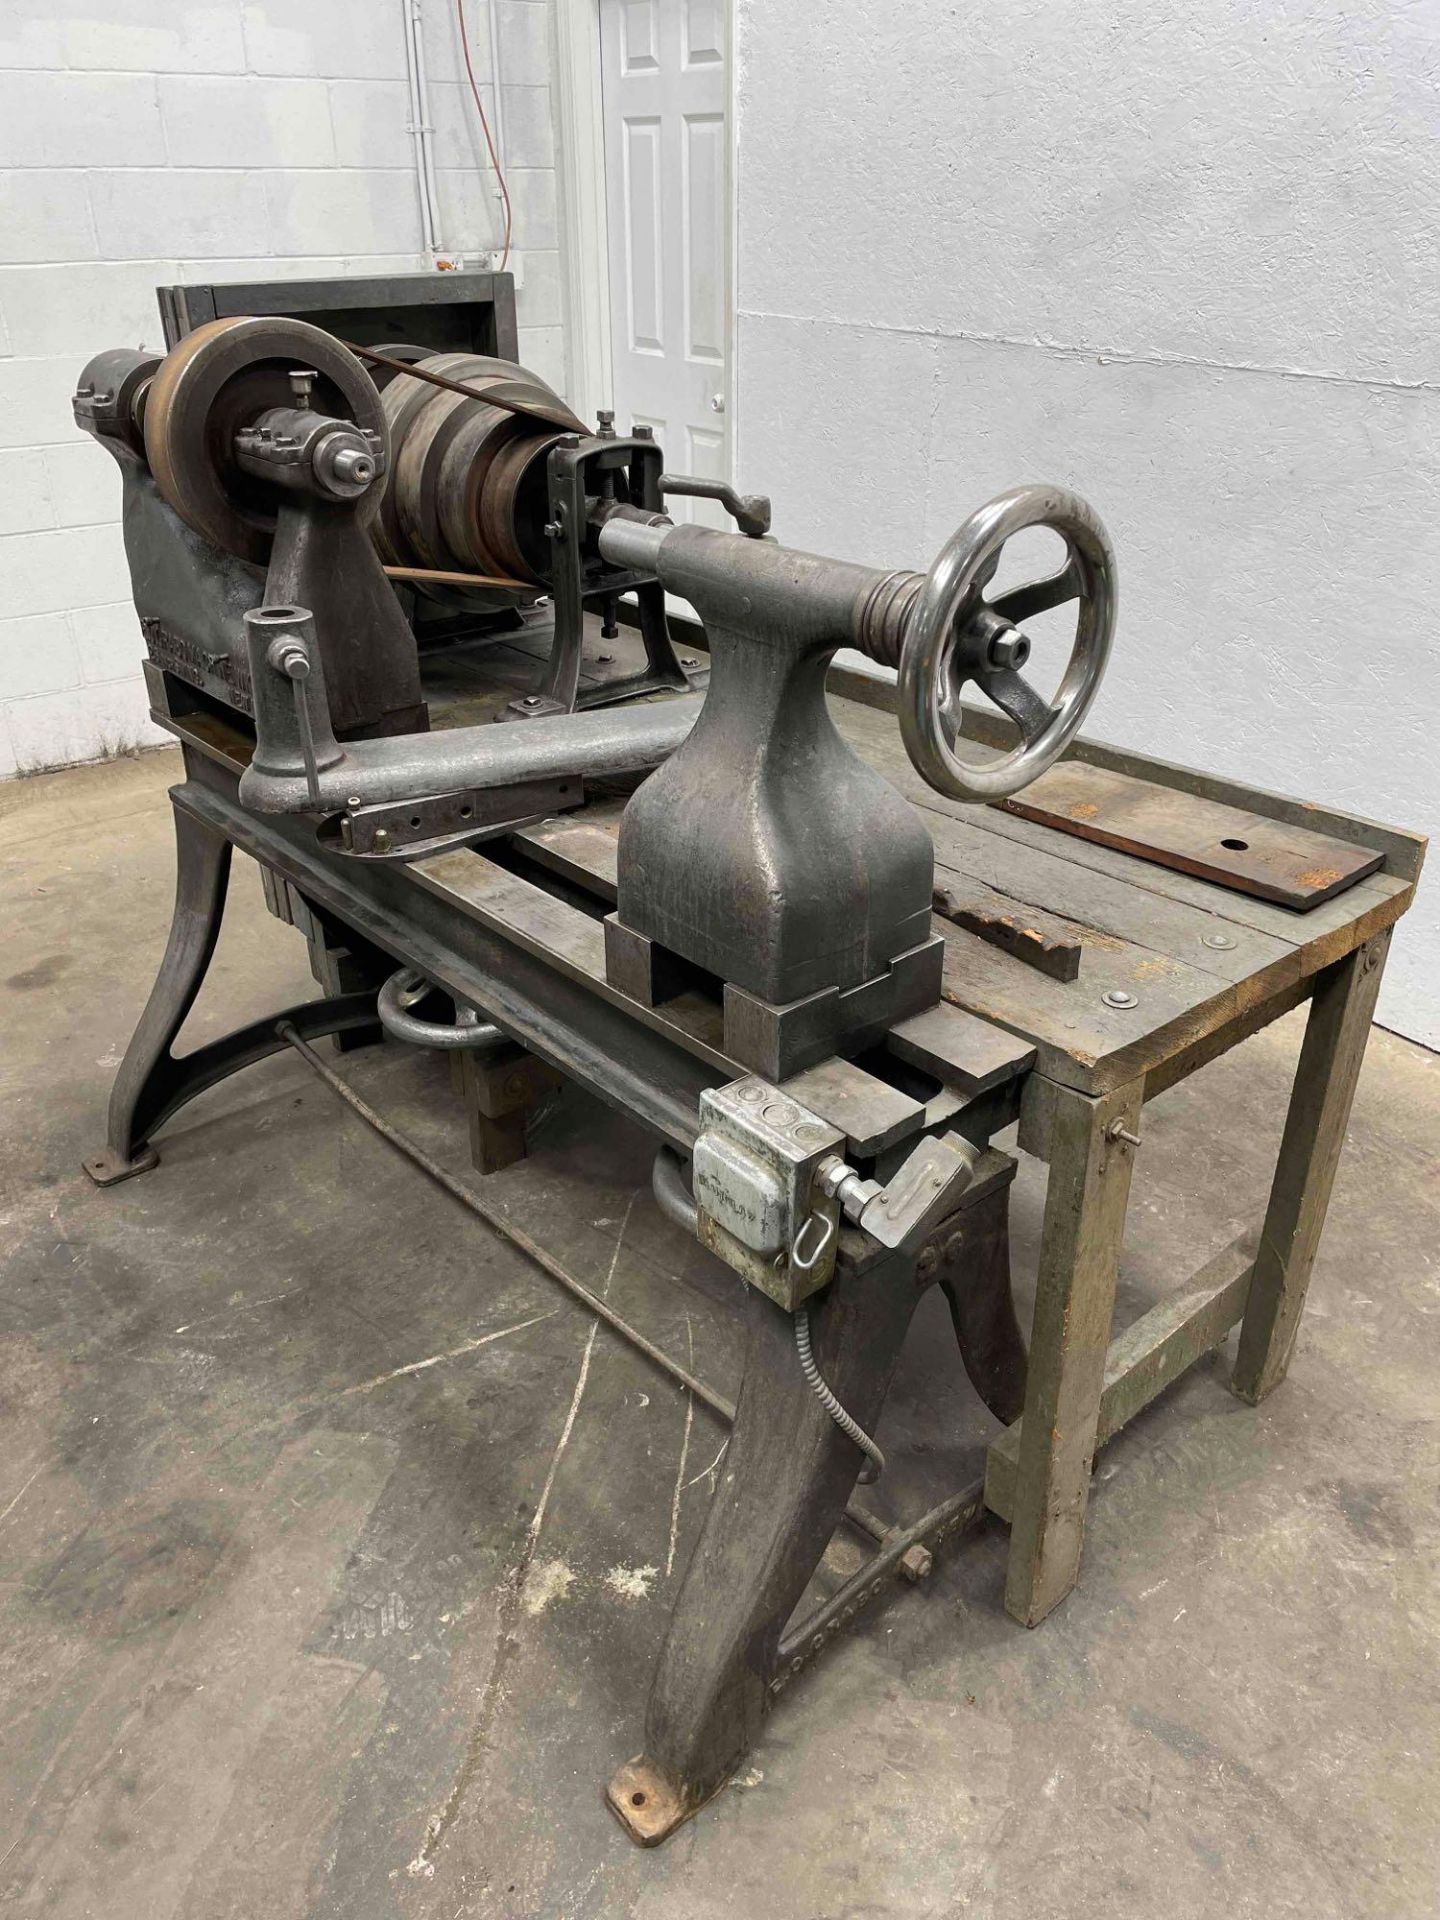 E.O.Grabo Machine Wks Spinning Lathe, 26 in Swing, 24" Between Centers, 1.5 HP, 1 Phase, 208V   $50 - Image 3 of 19